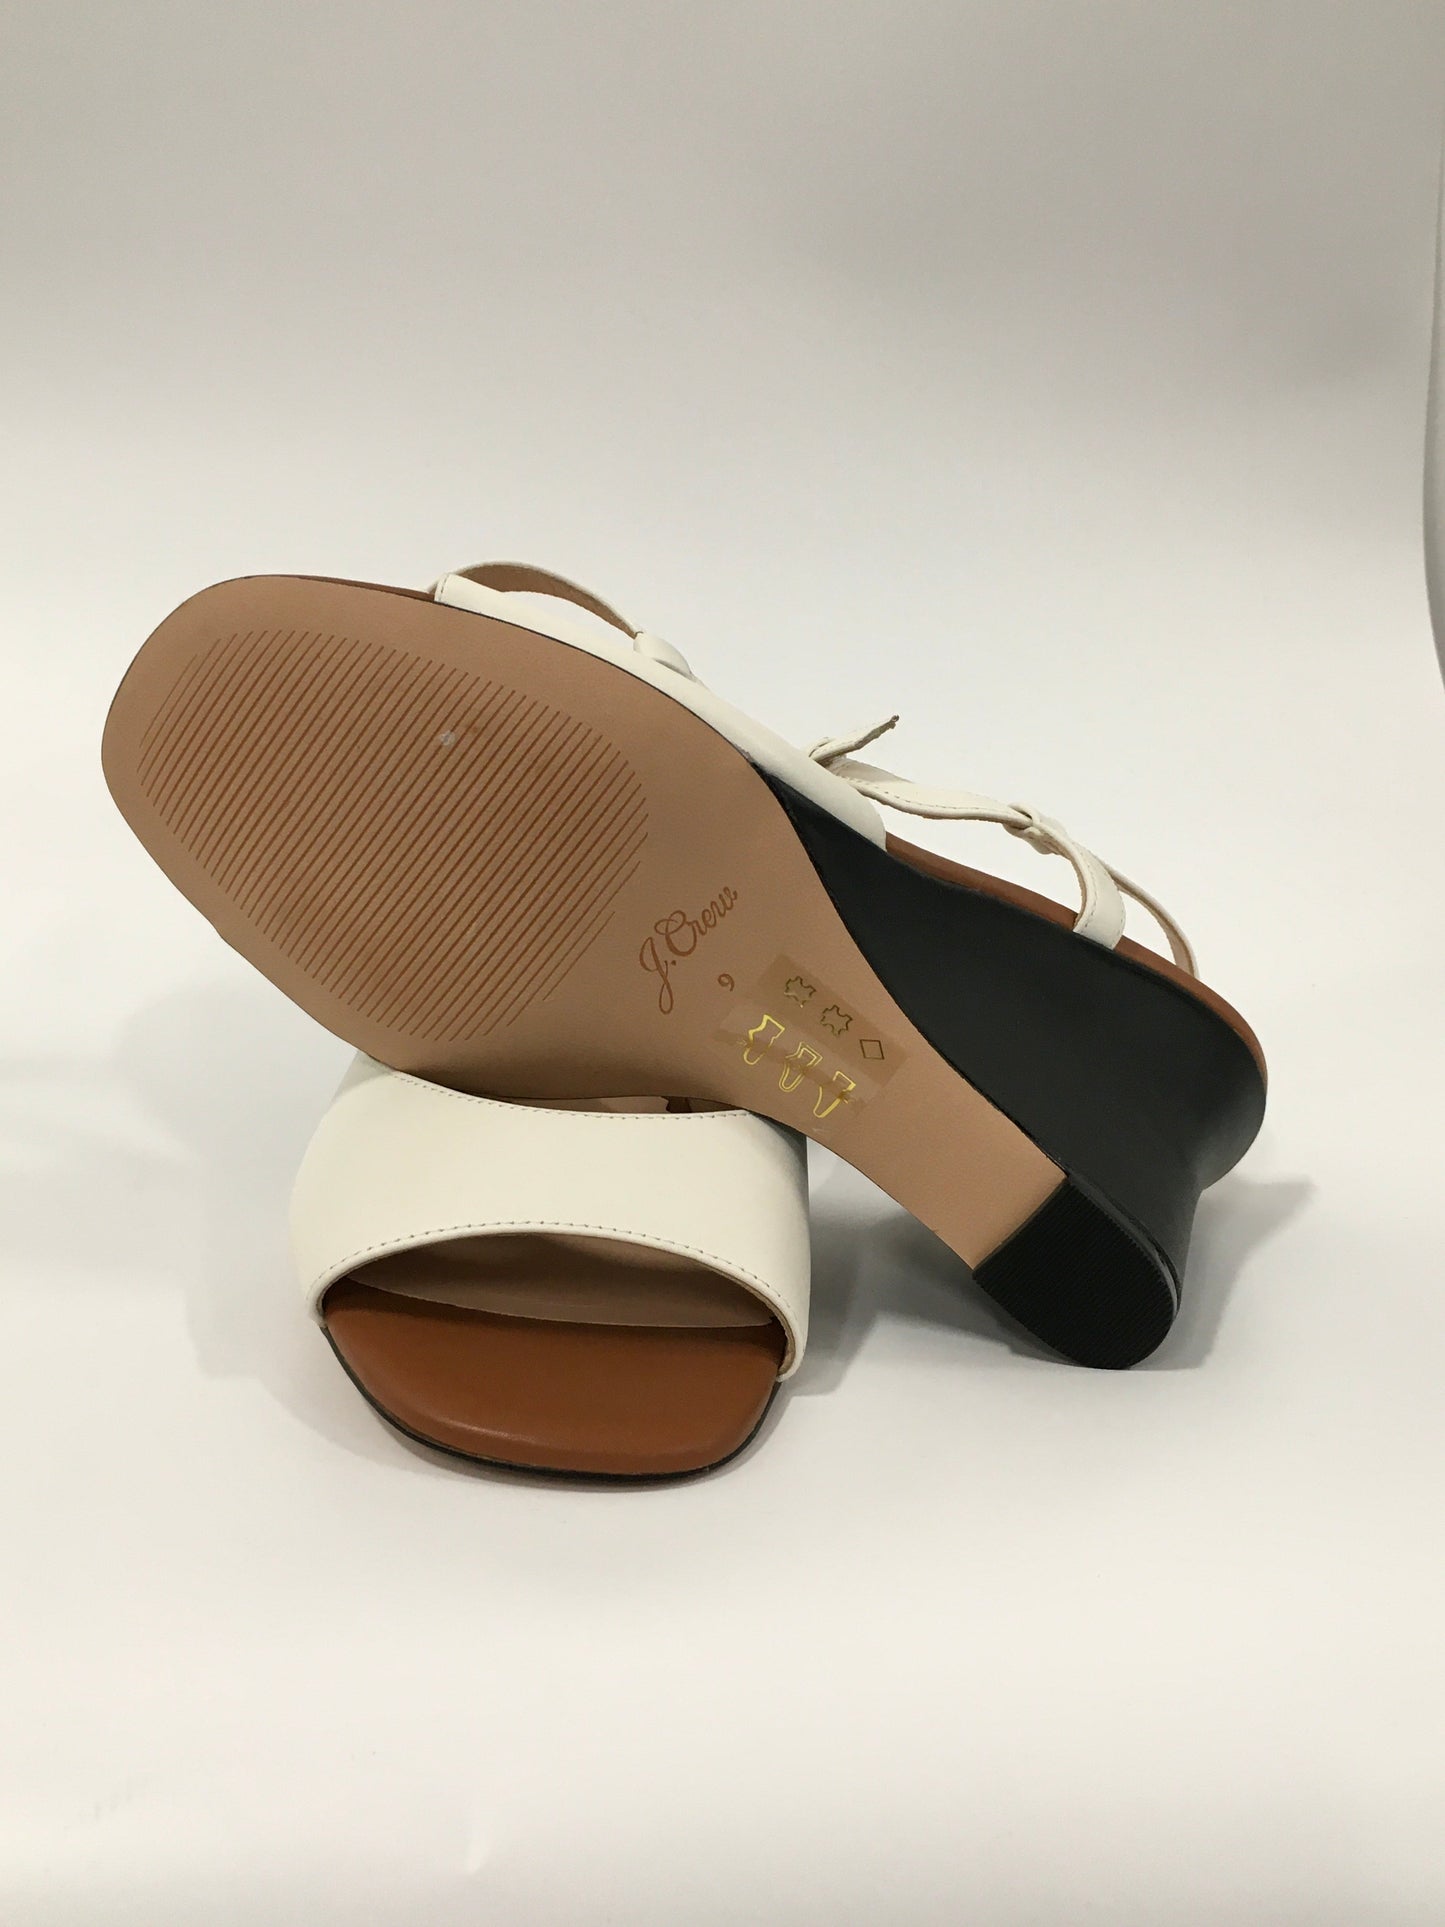 White Shoes Heels Wedge J. Crew, Size 9